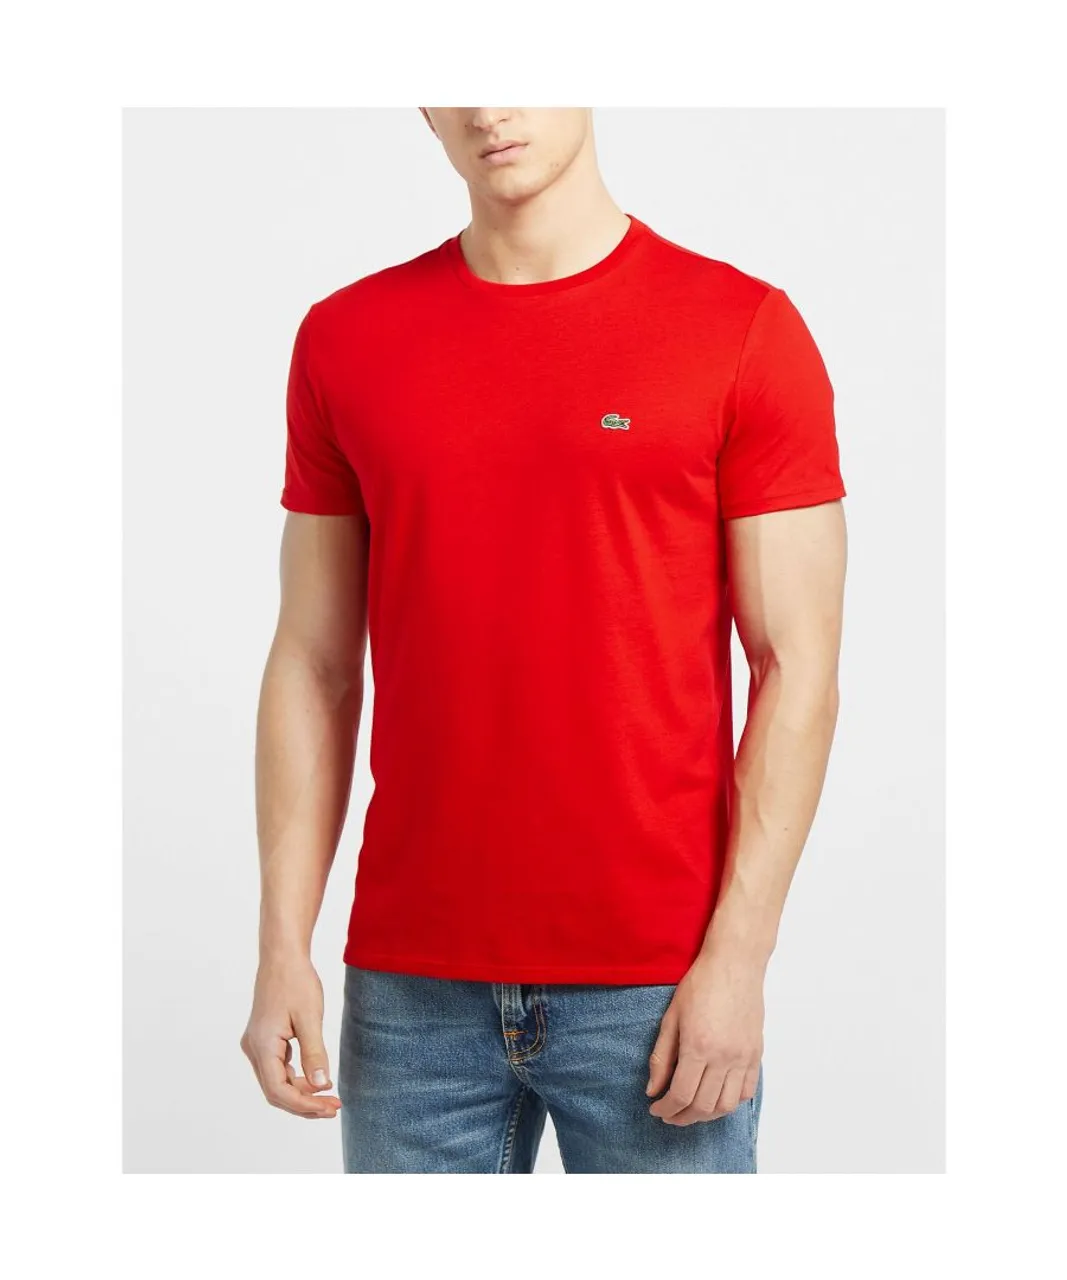 Lacoste Mens Crew Neck Pima Cotton Jersey T-Shirt in Red